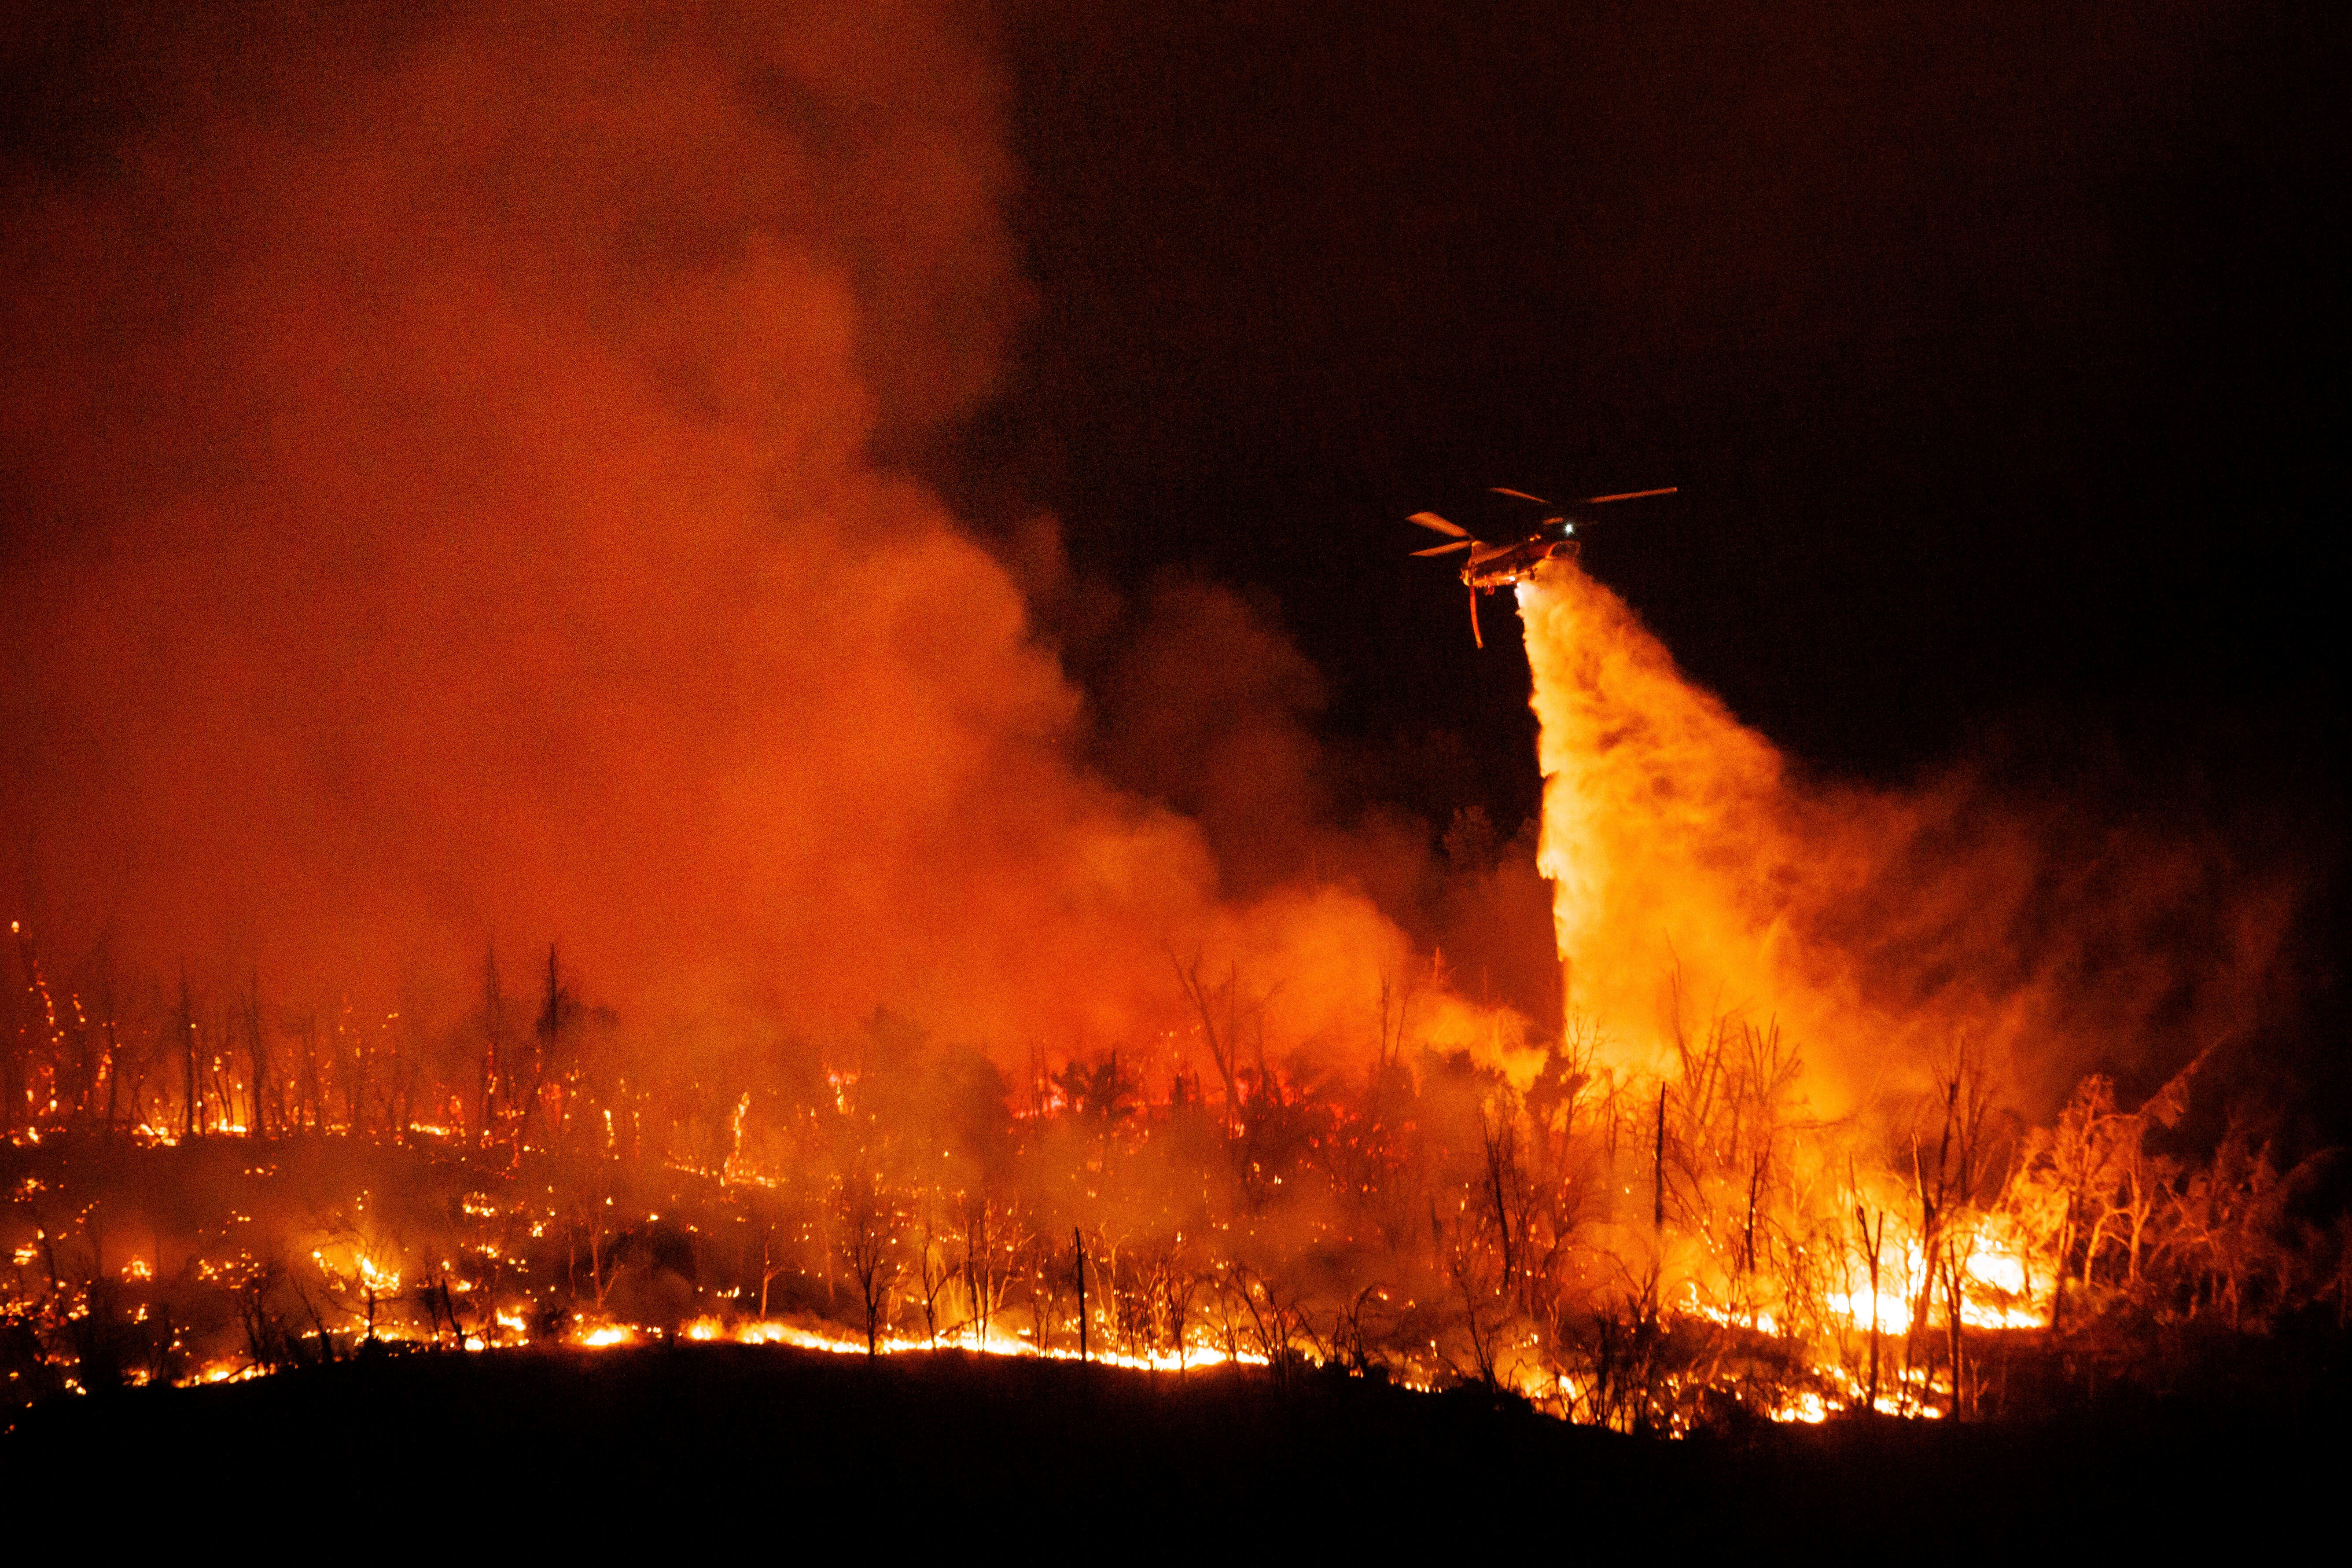 Helicopters try to douse the flames in a forested area of Butte County on Tuesday night